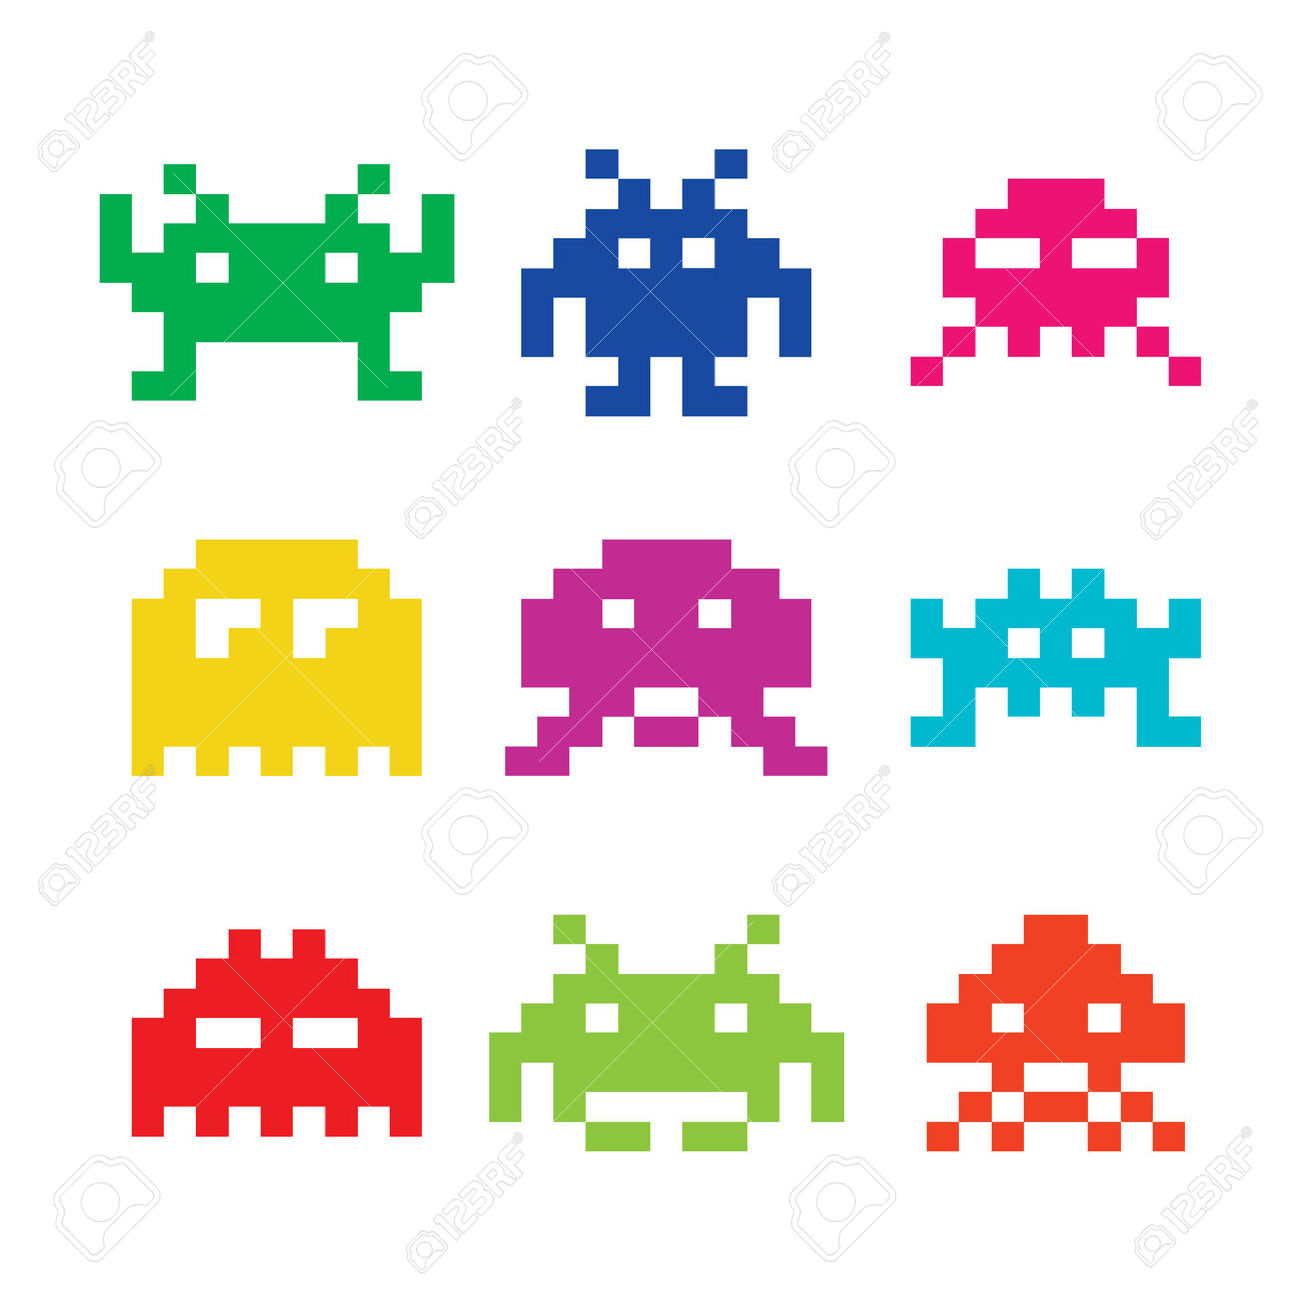 space invaders clipart - photo #11